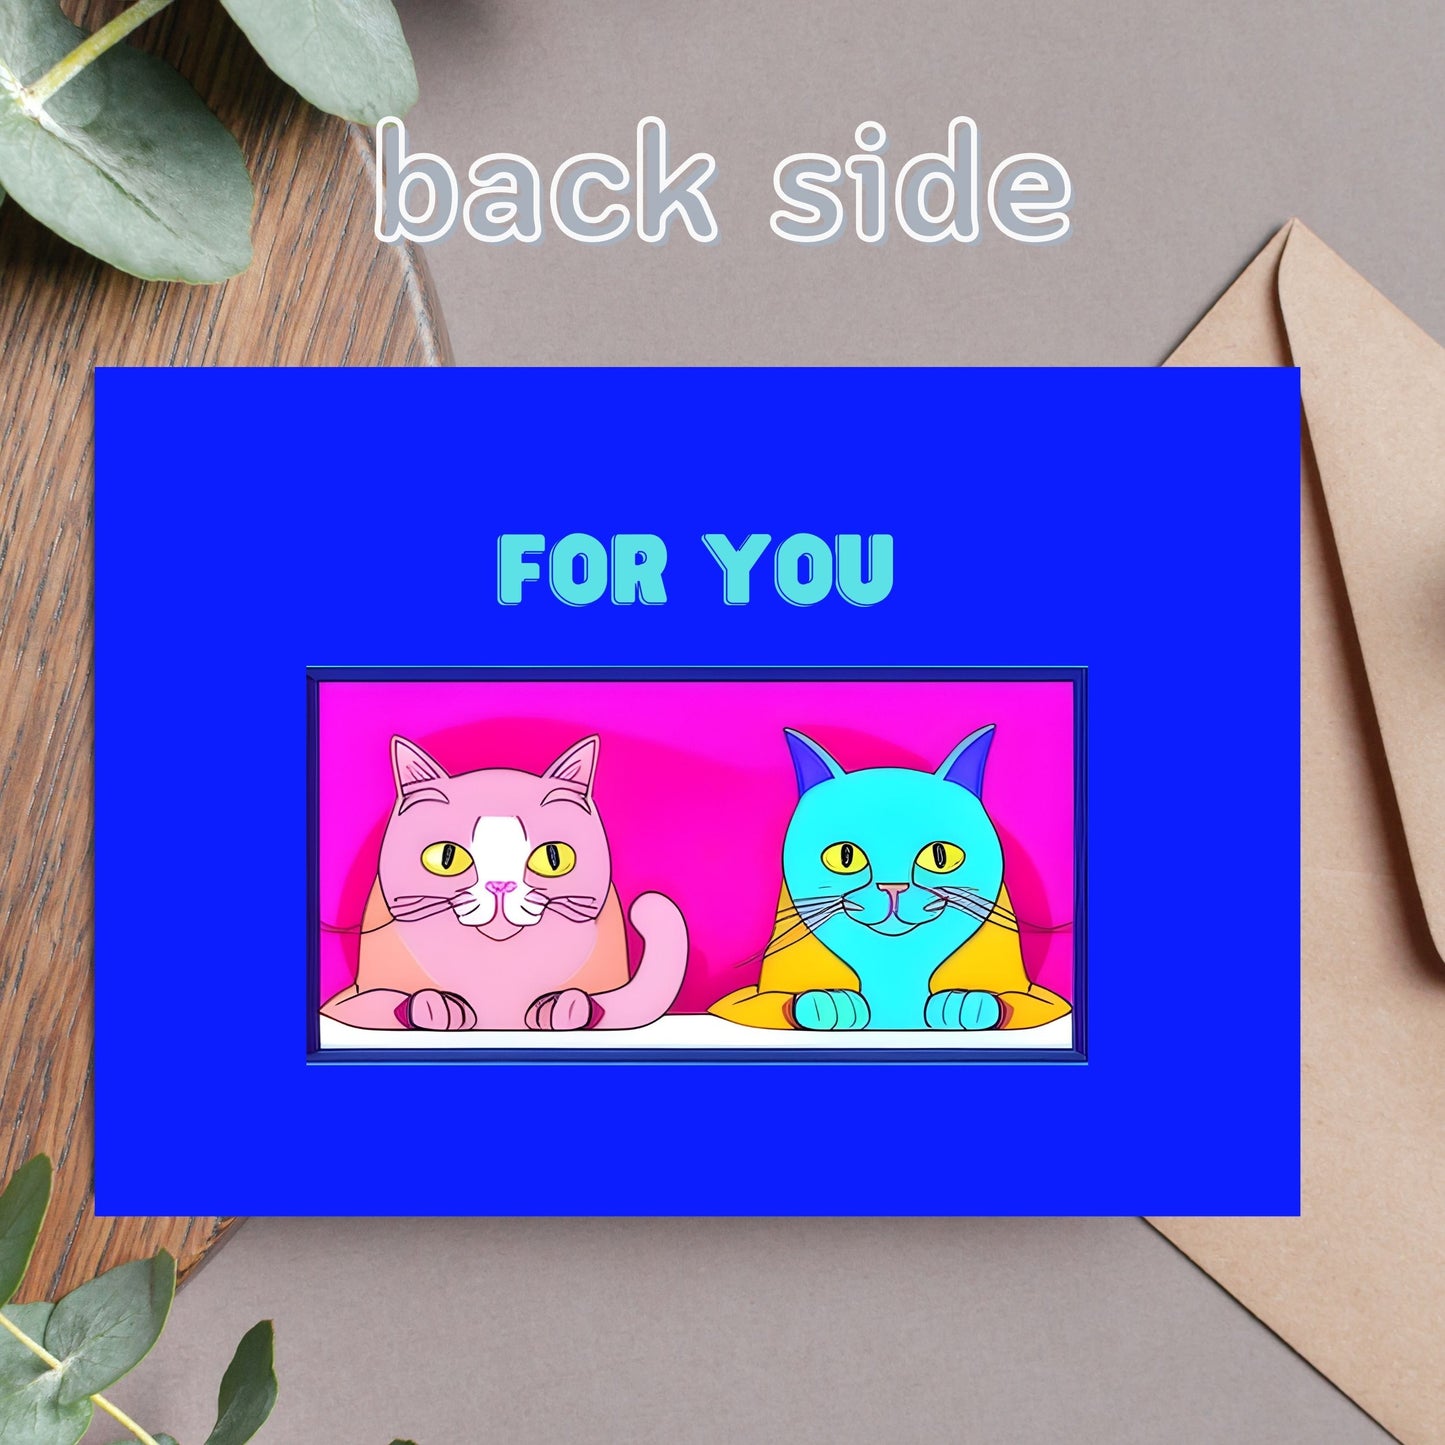 A Couple Cat Printable Gift Card (3 sizes include 3.5” x 5” , 4” x 6” , 5” x 7”) , print on 8.5"x11" paper size